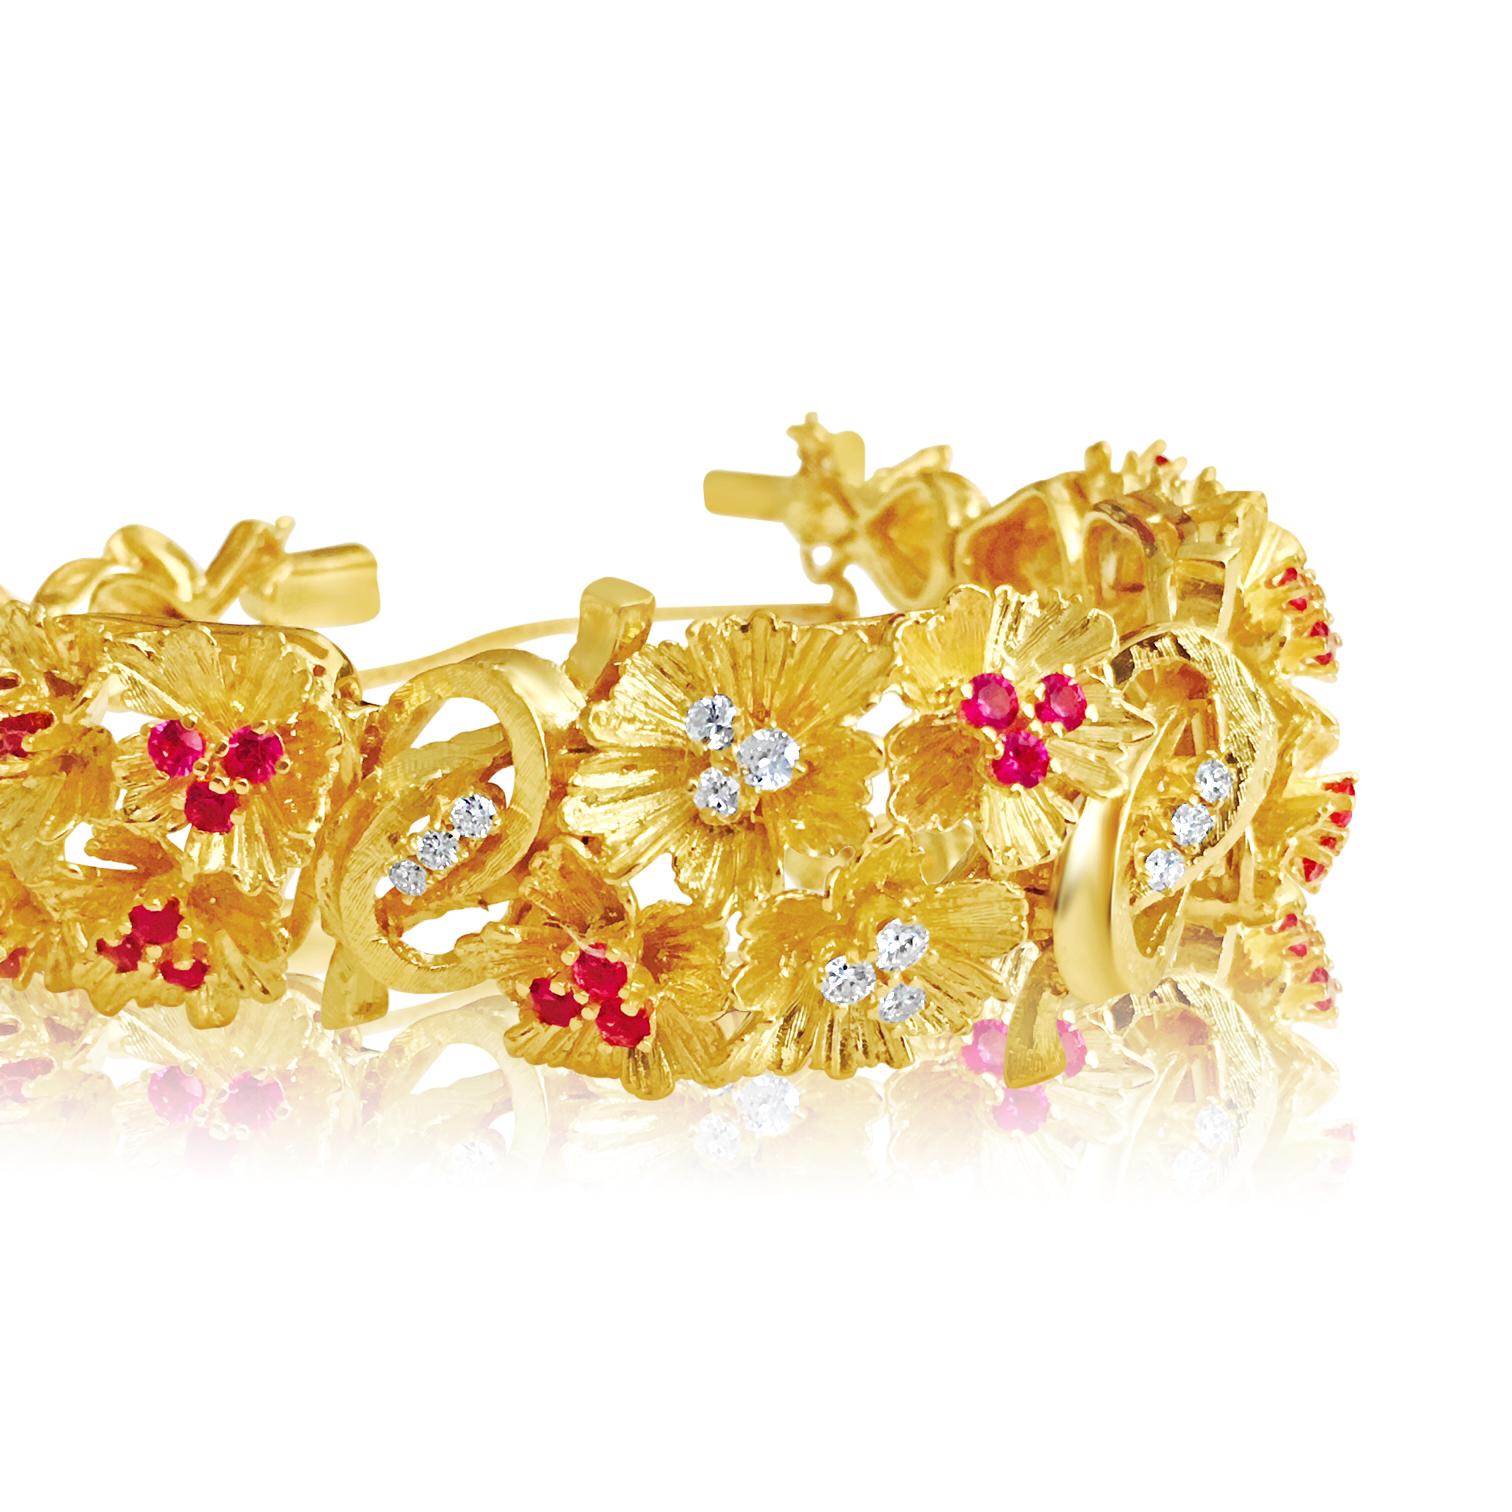 Womens 6.00 Carat Burma Ruby and Diamond Bracelet in Yellow Gold In Good Condition For Sale In Miami, FL